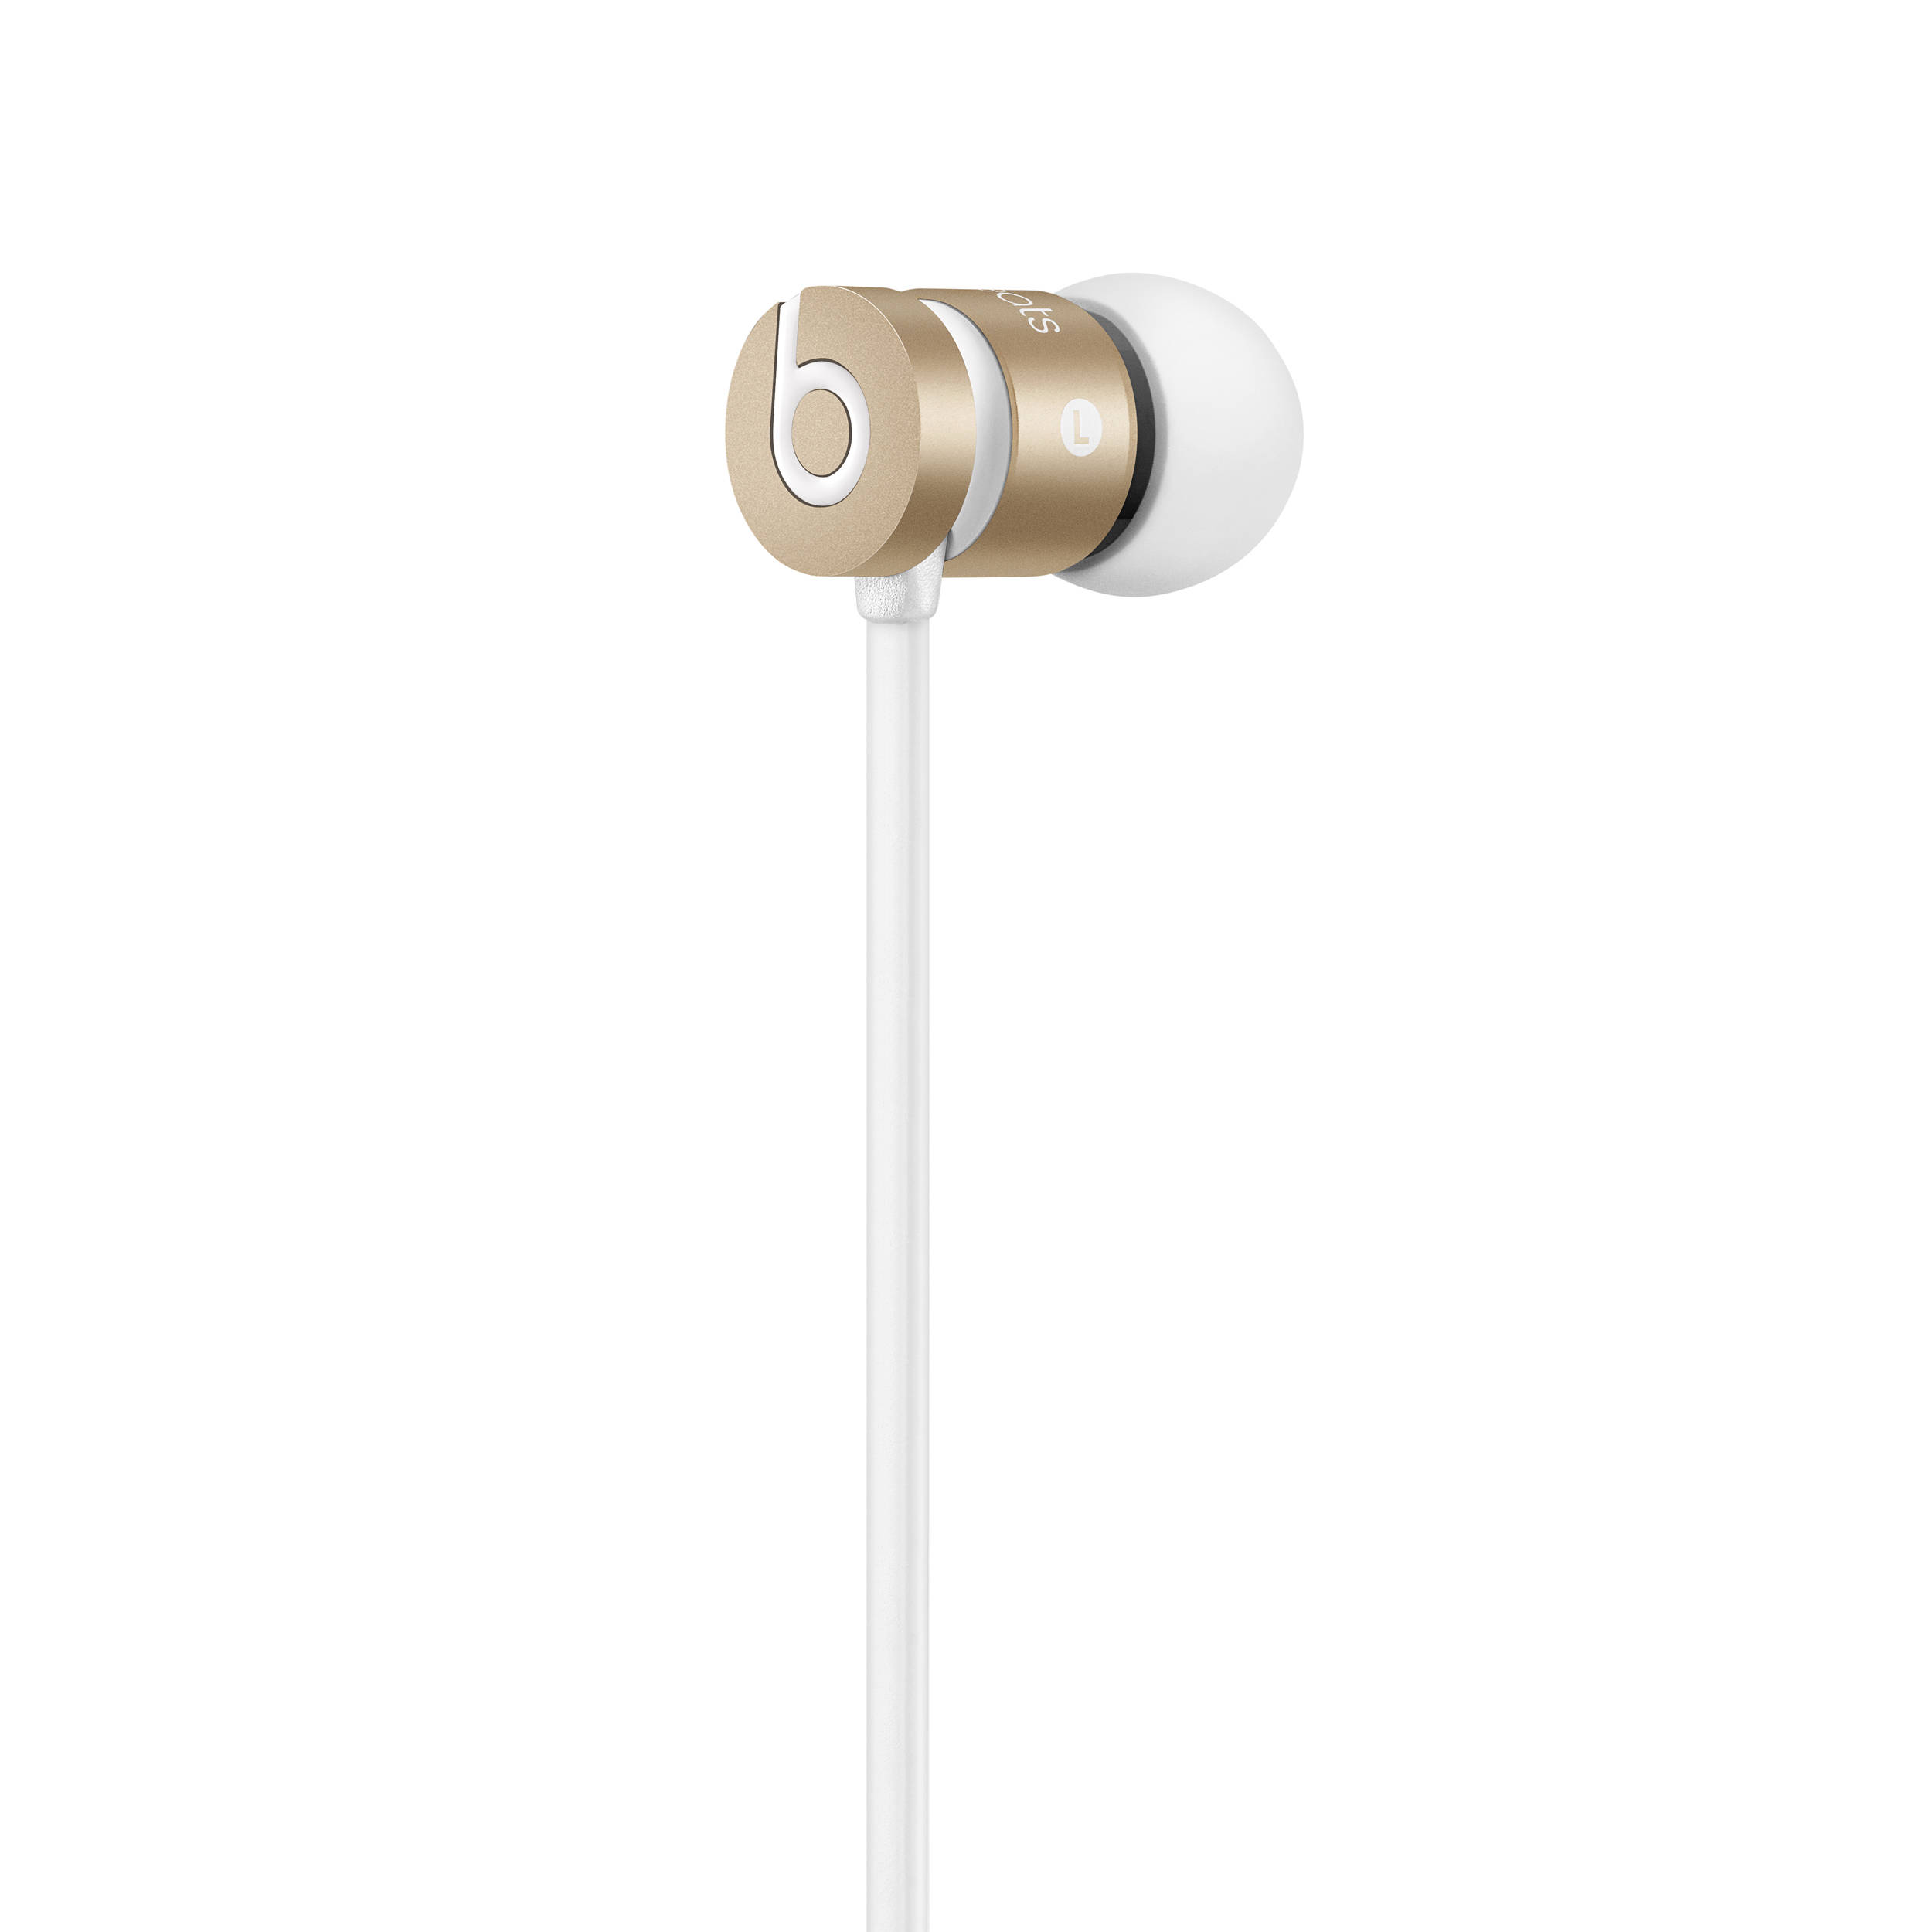 beats white and gold headphones